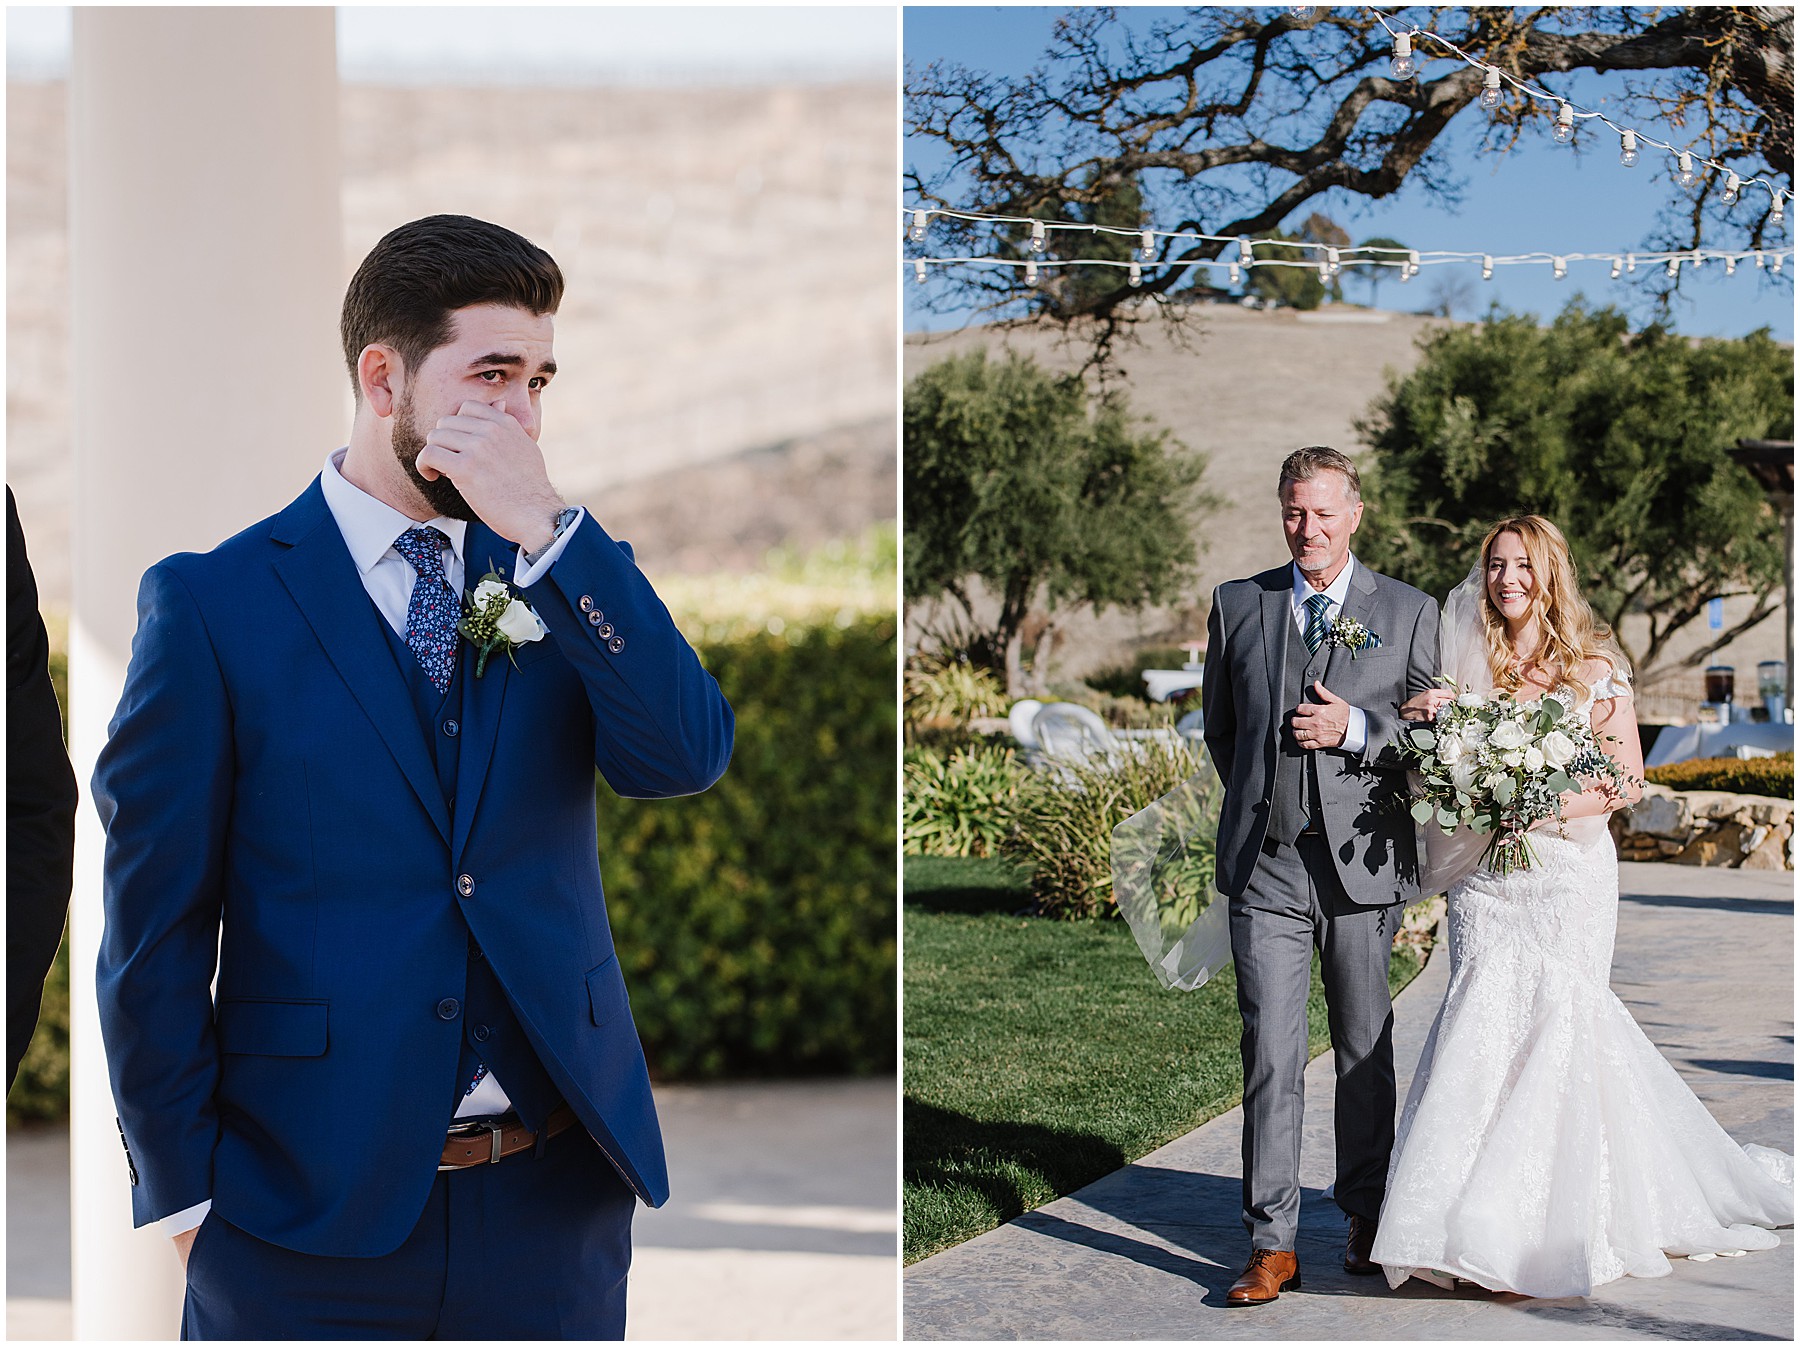 Villa San Juliette Winery Winter Pandemic Wedding with Peter and Taylor in Paso Robles, California